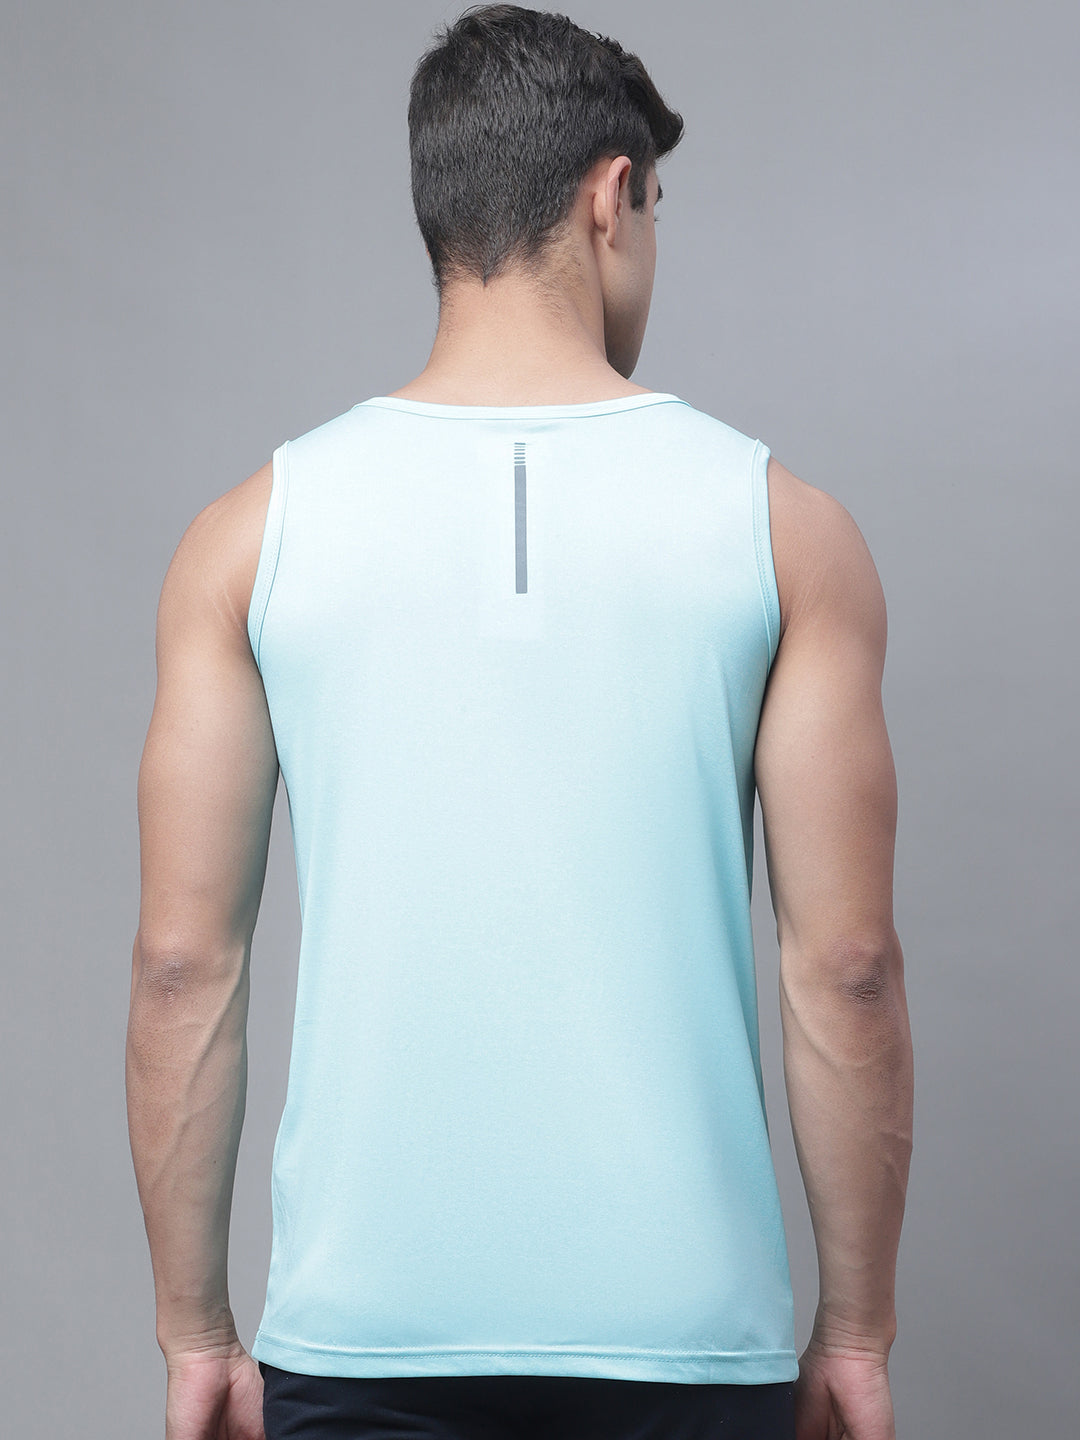 Sports Strong Lift Wear Round Neck Training Gym Vest - Friskers